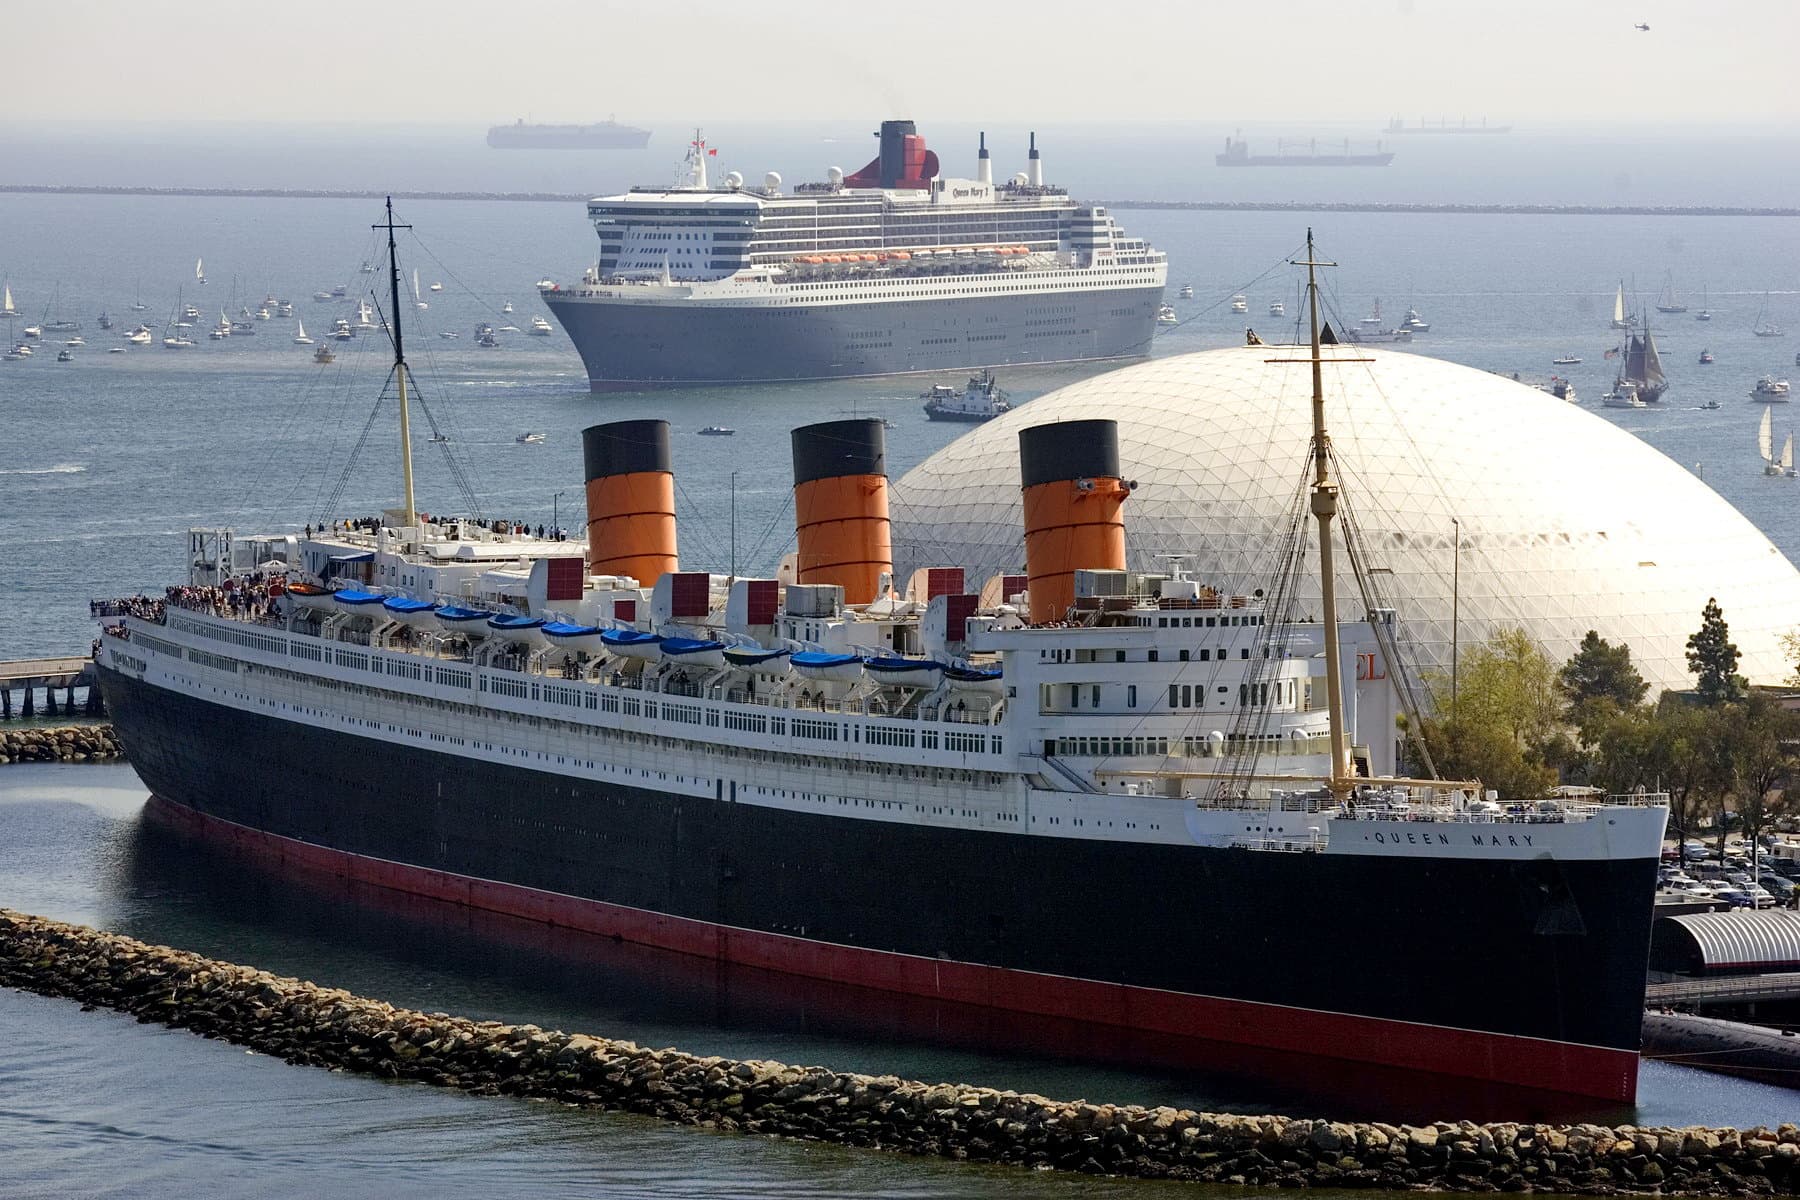 Two Queen Mary